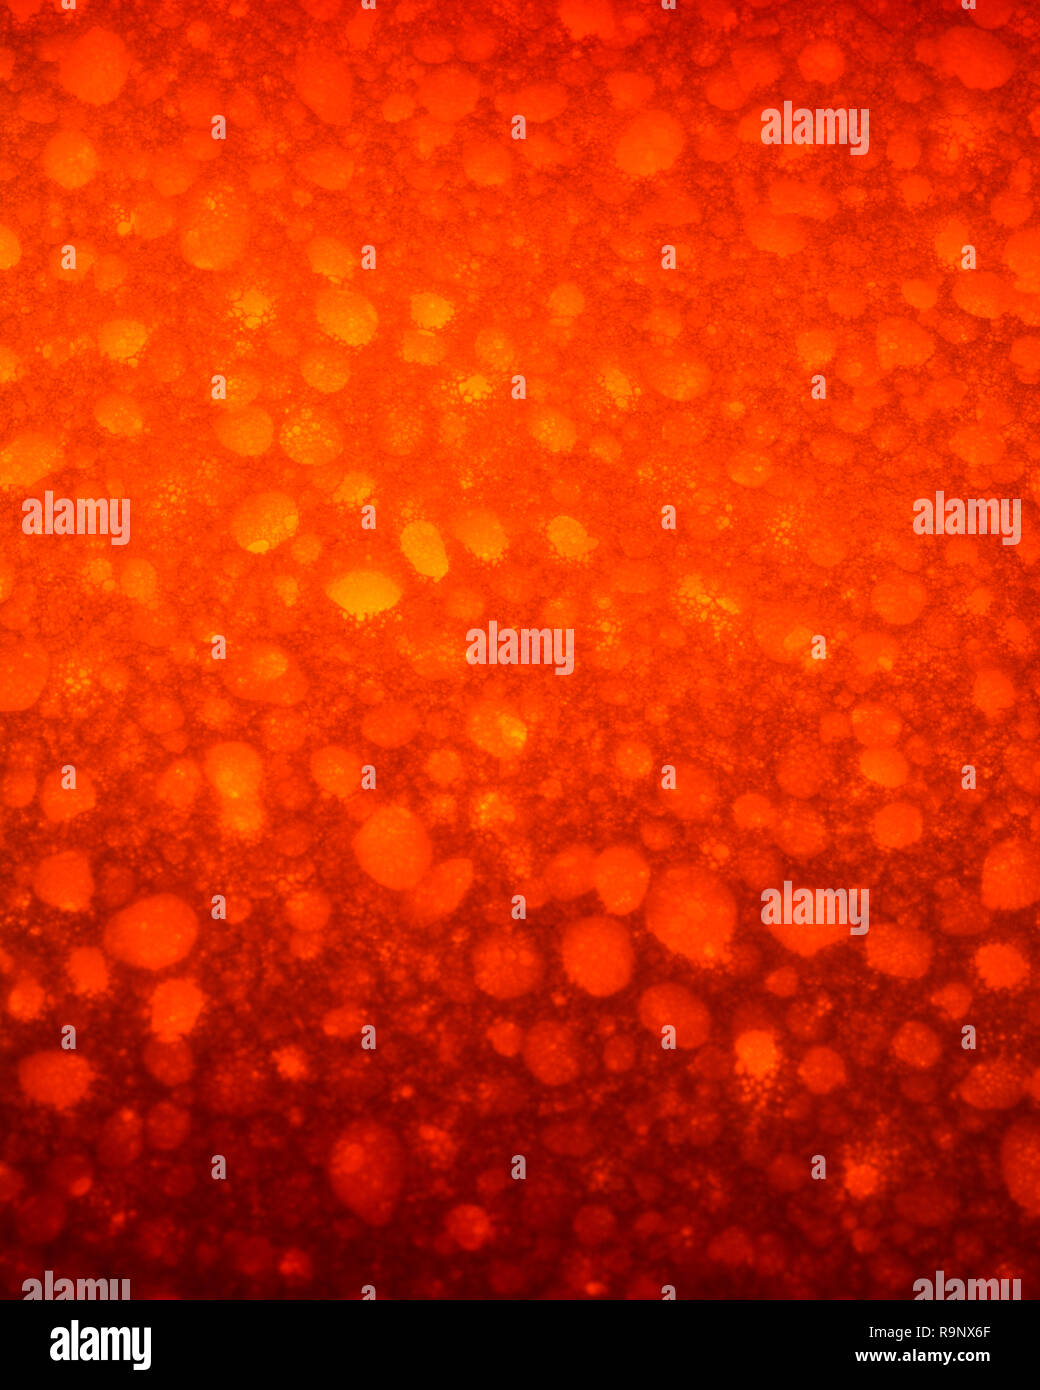 Macro close-up of artificial polymer sponge pores (maybe polyester or polypropylene). For sponging, cleaning, absorbing, war on plastic, red anger Stock Photo